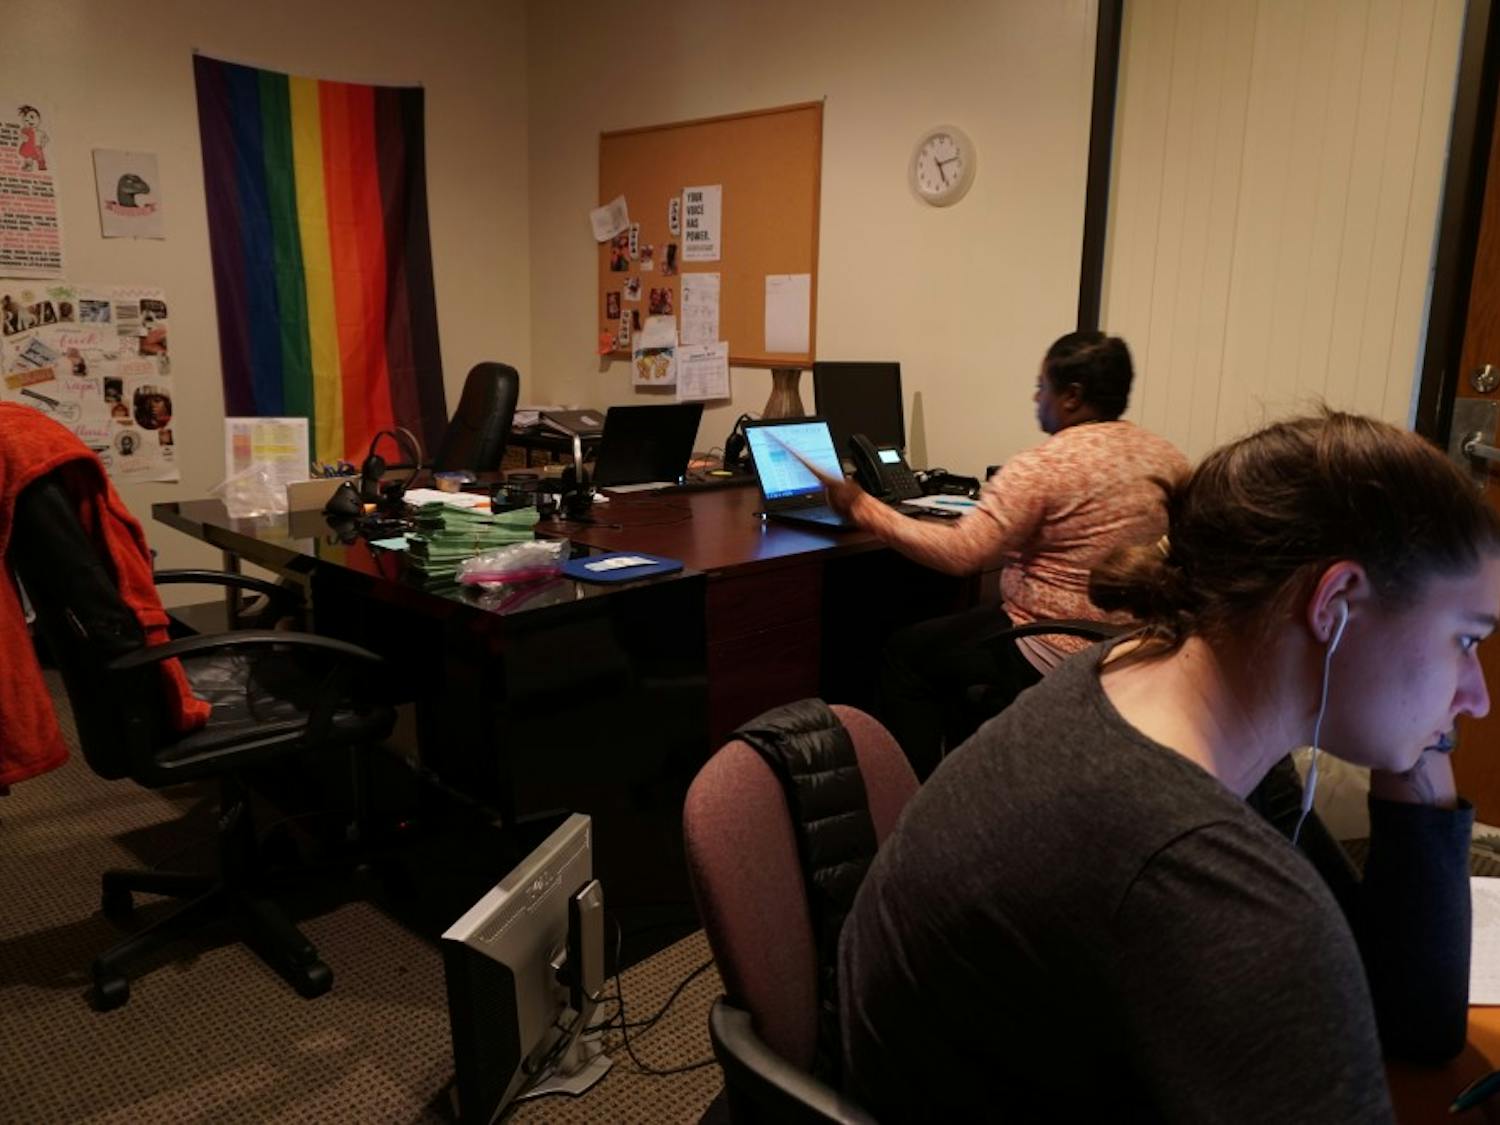 &nbsp;Tracy Miller, community education director, and Julia Reich, student volunteer, get work done at the Orange County Rape Crisis Center in Chapel Hill on Wednesday, Jan. 16, 2019.